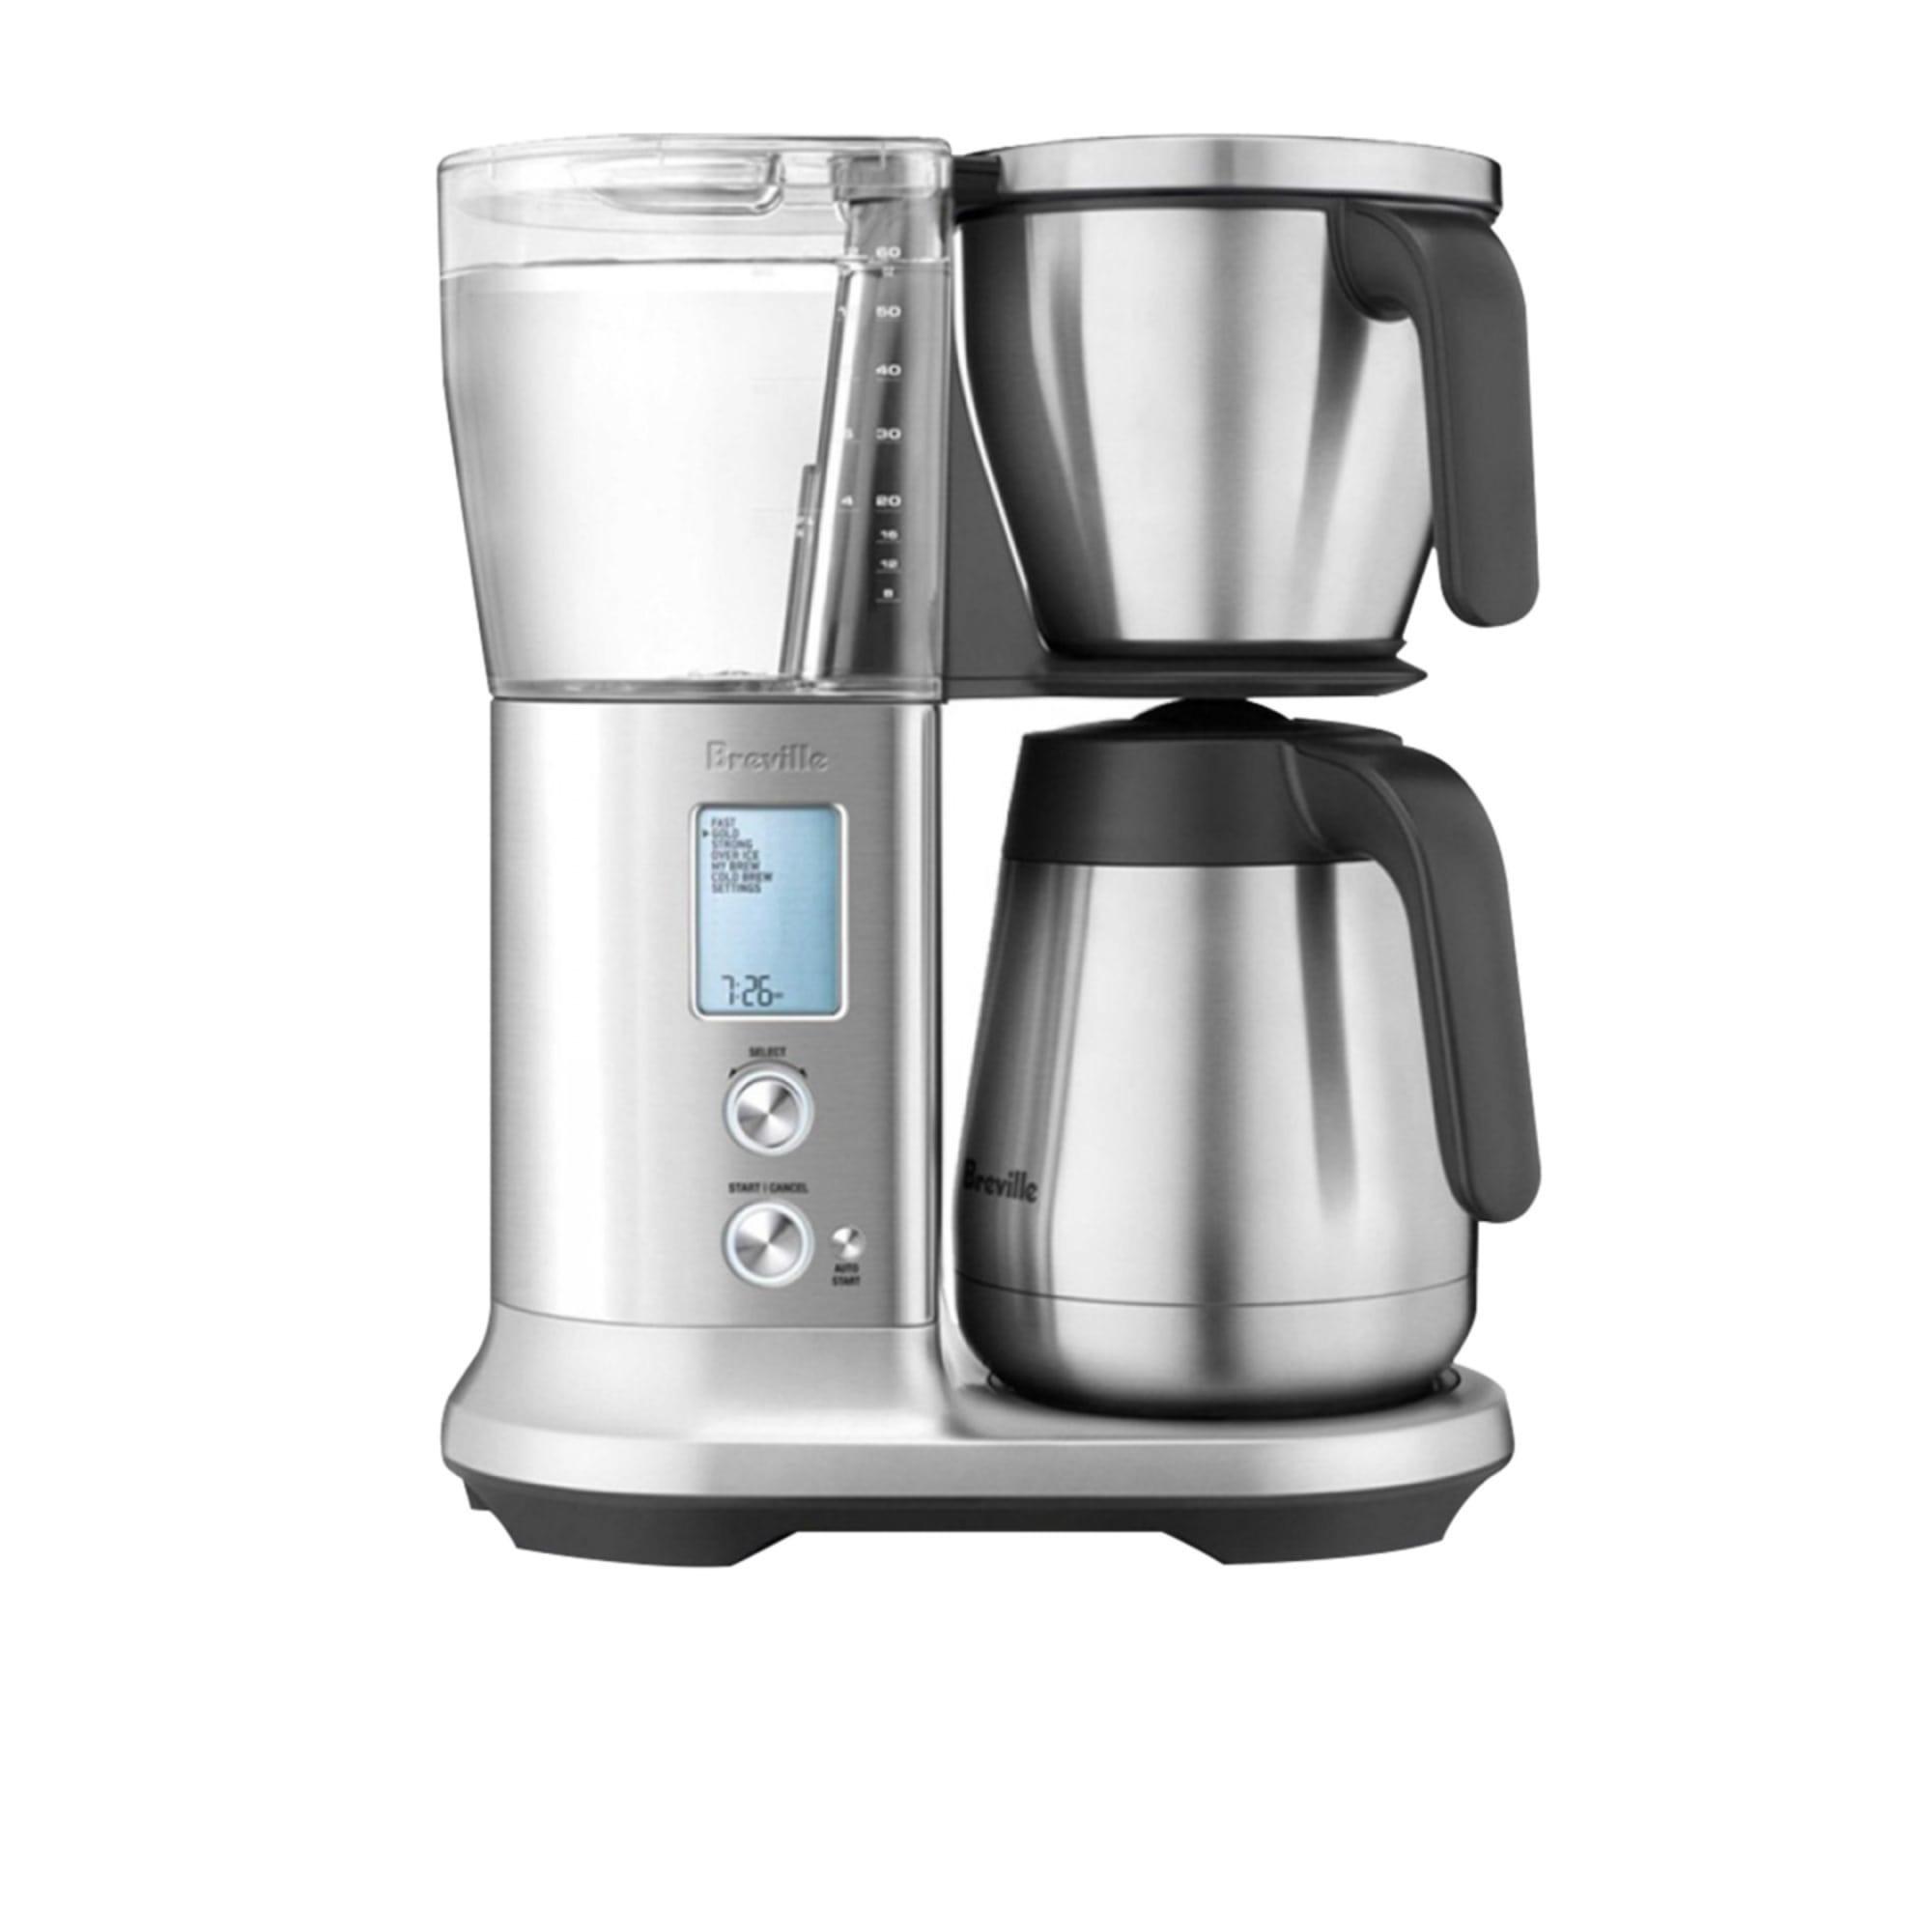 Breville The Precision Thermal Brewer 1.8L Image 1